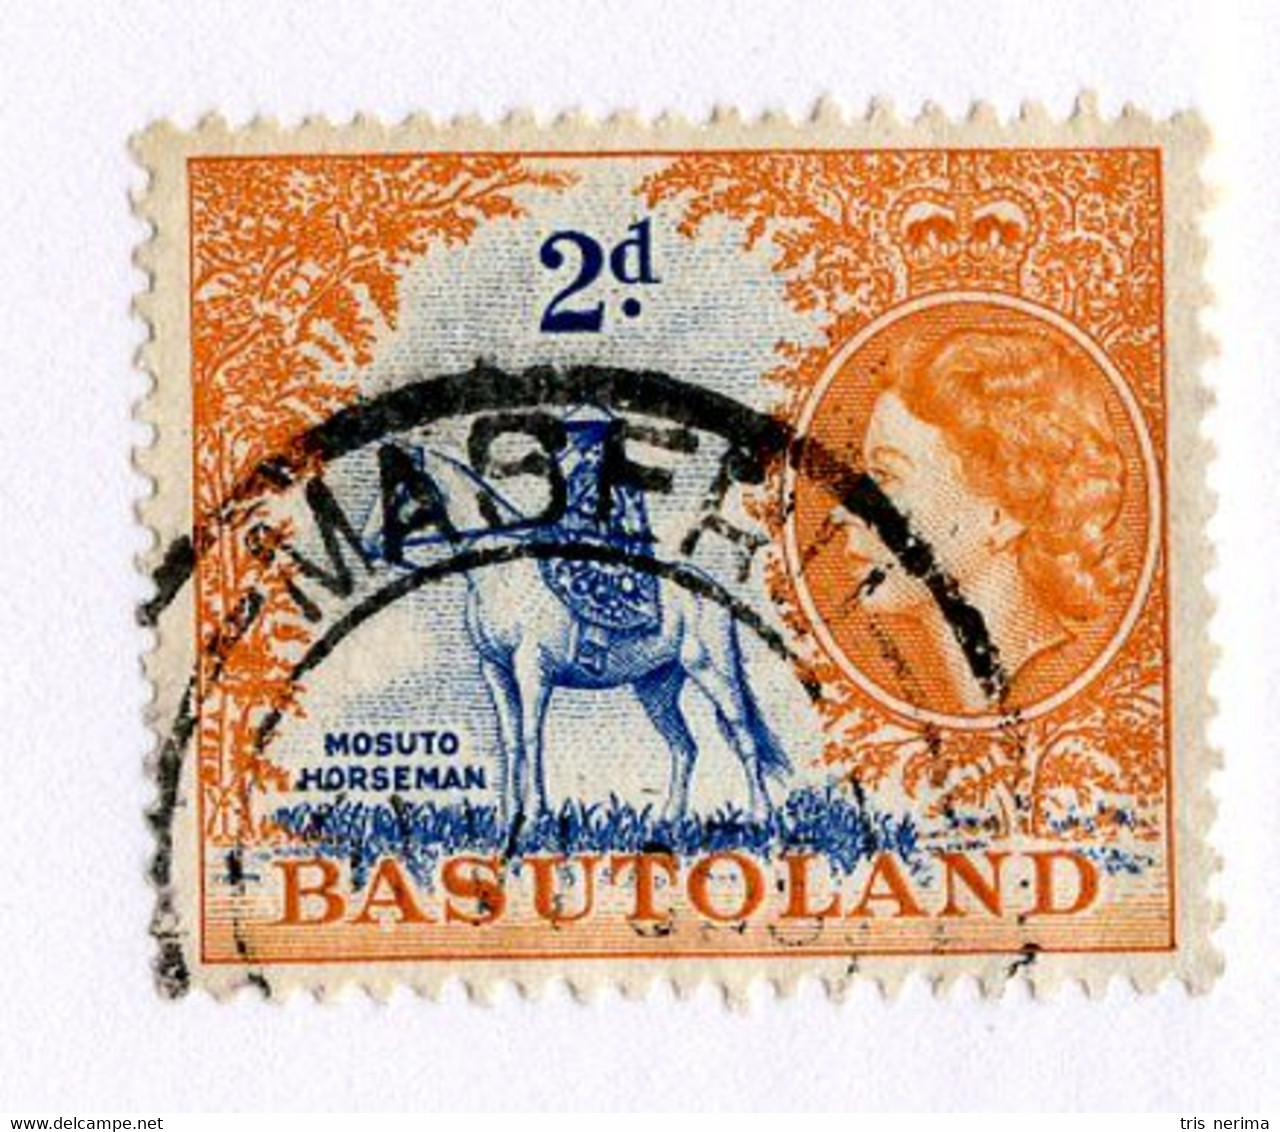 9820 BC Basutoland 1954 Scott# 48 Used [Offers Welcome] - 1965-1966 Gouvernement Autonome